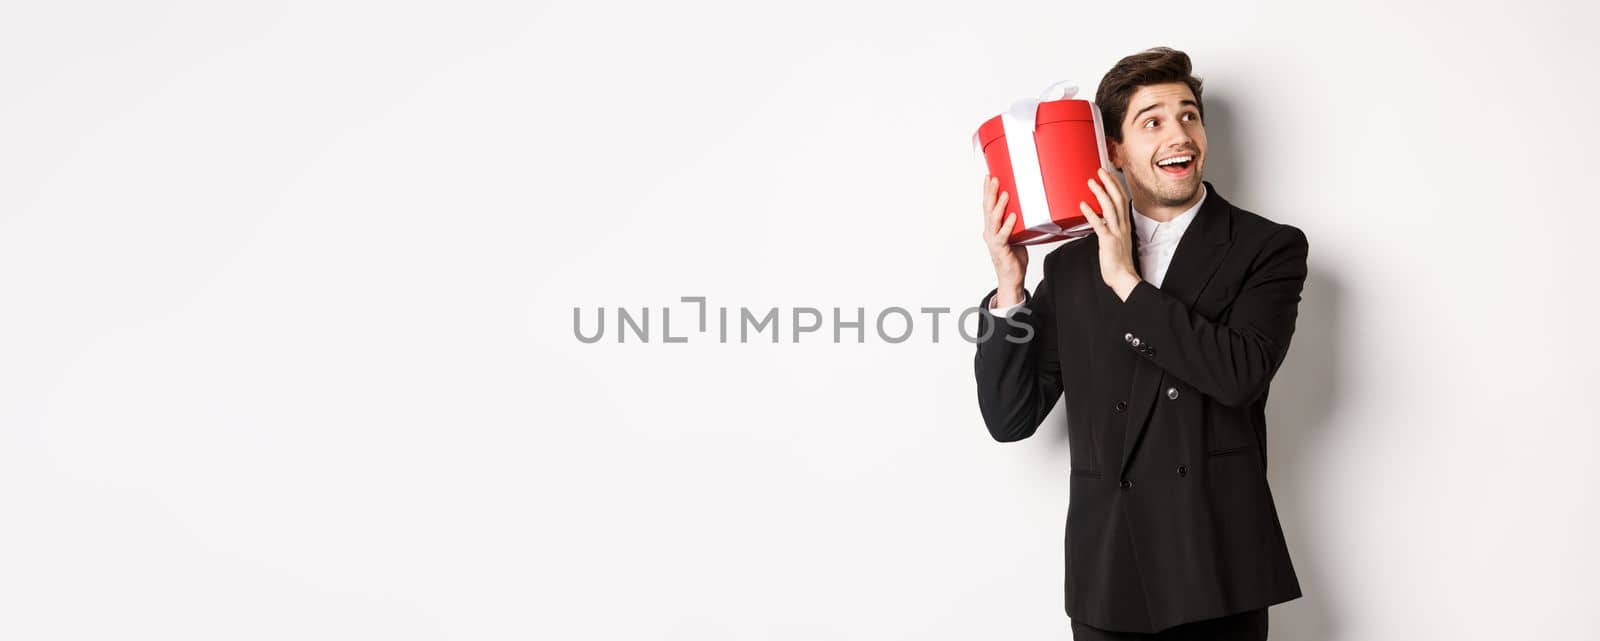 Concept of christmas holidays, celebration and lifestyle. Image of attractive man in black suit, shaking present to guess what inside, enjoying new year, standing against white background.